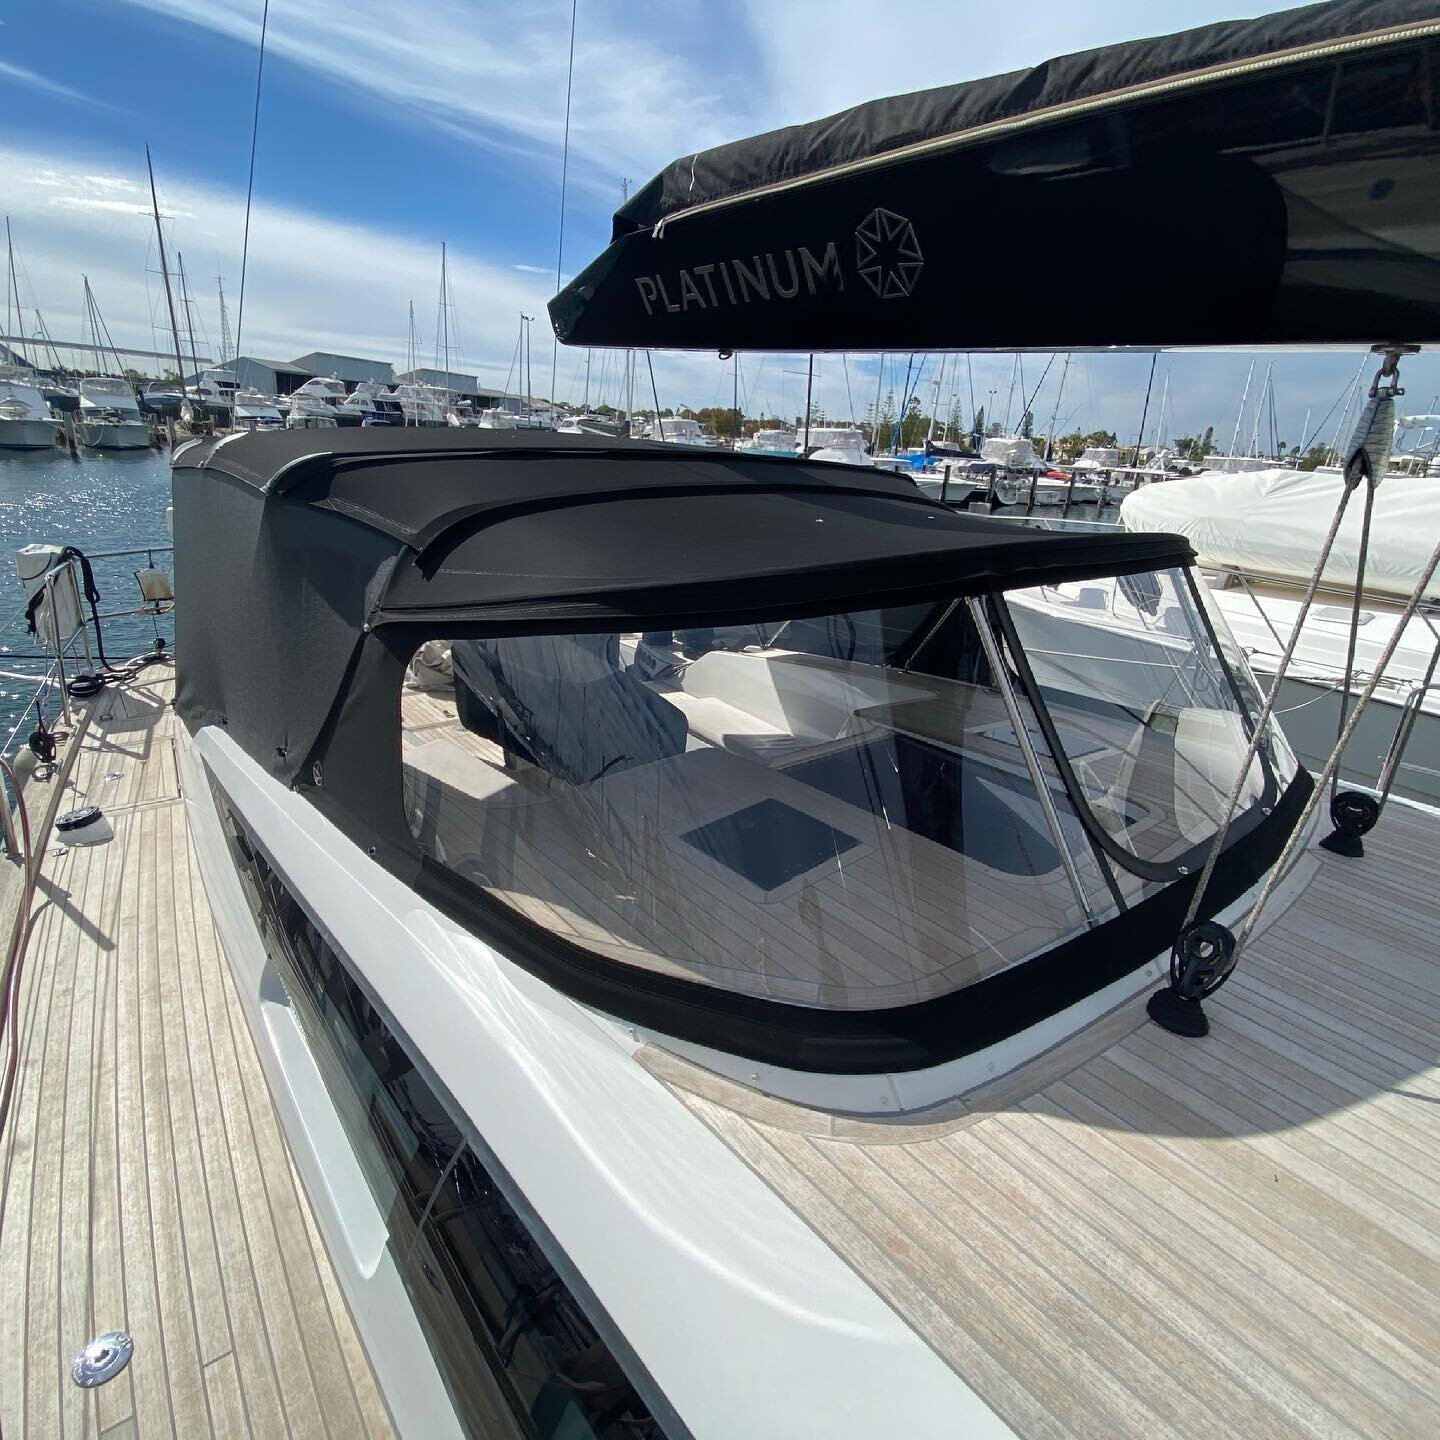 Yacht project we recently completed with all stainless work and canvas completed in-house. Make sure to scroll through and check out the before and after photo. #cnb60 #sunbrellaaustralia #fremantlesailingclub #seamark #tenarathread #yachts #yachtdod